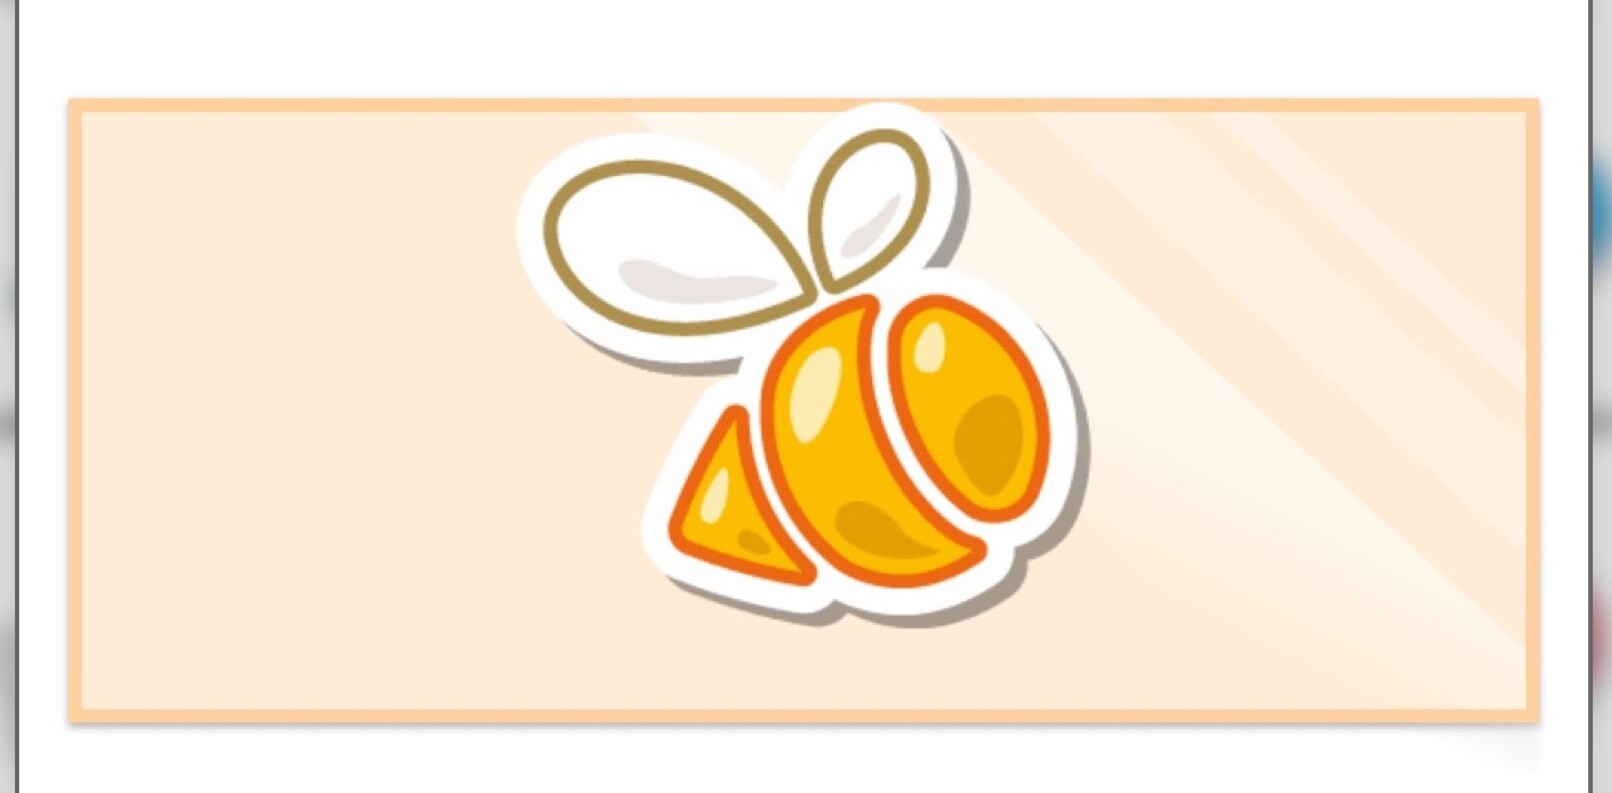 Screw the cynics, Foursquare’s Swarm is better than ever